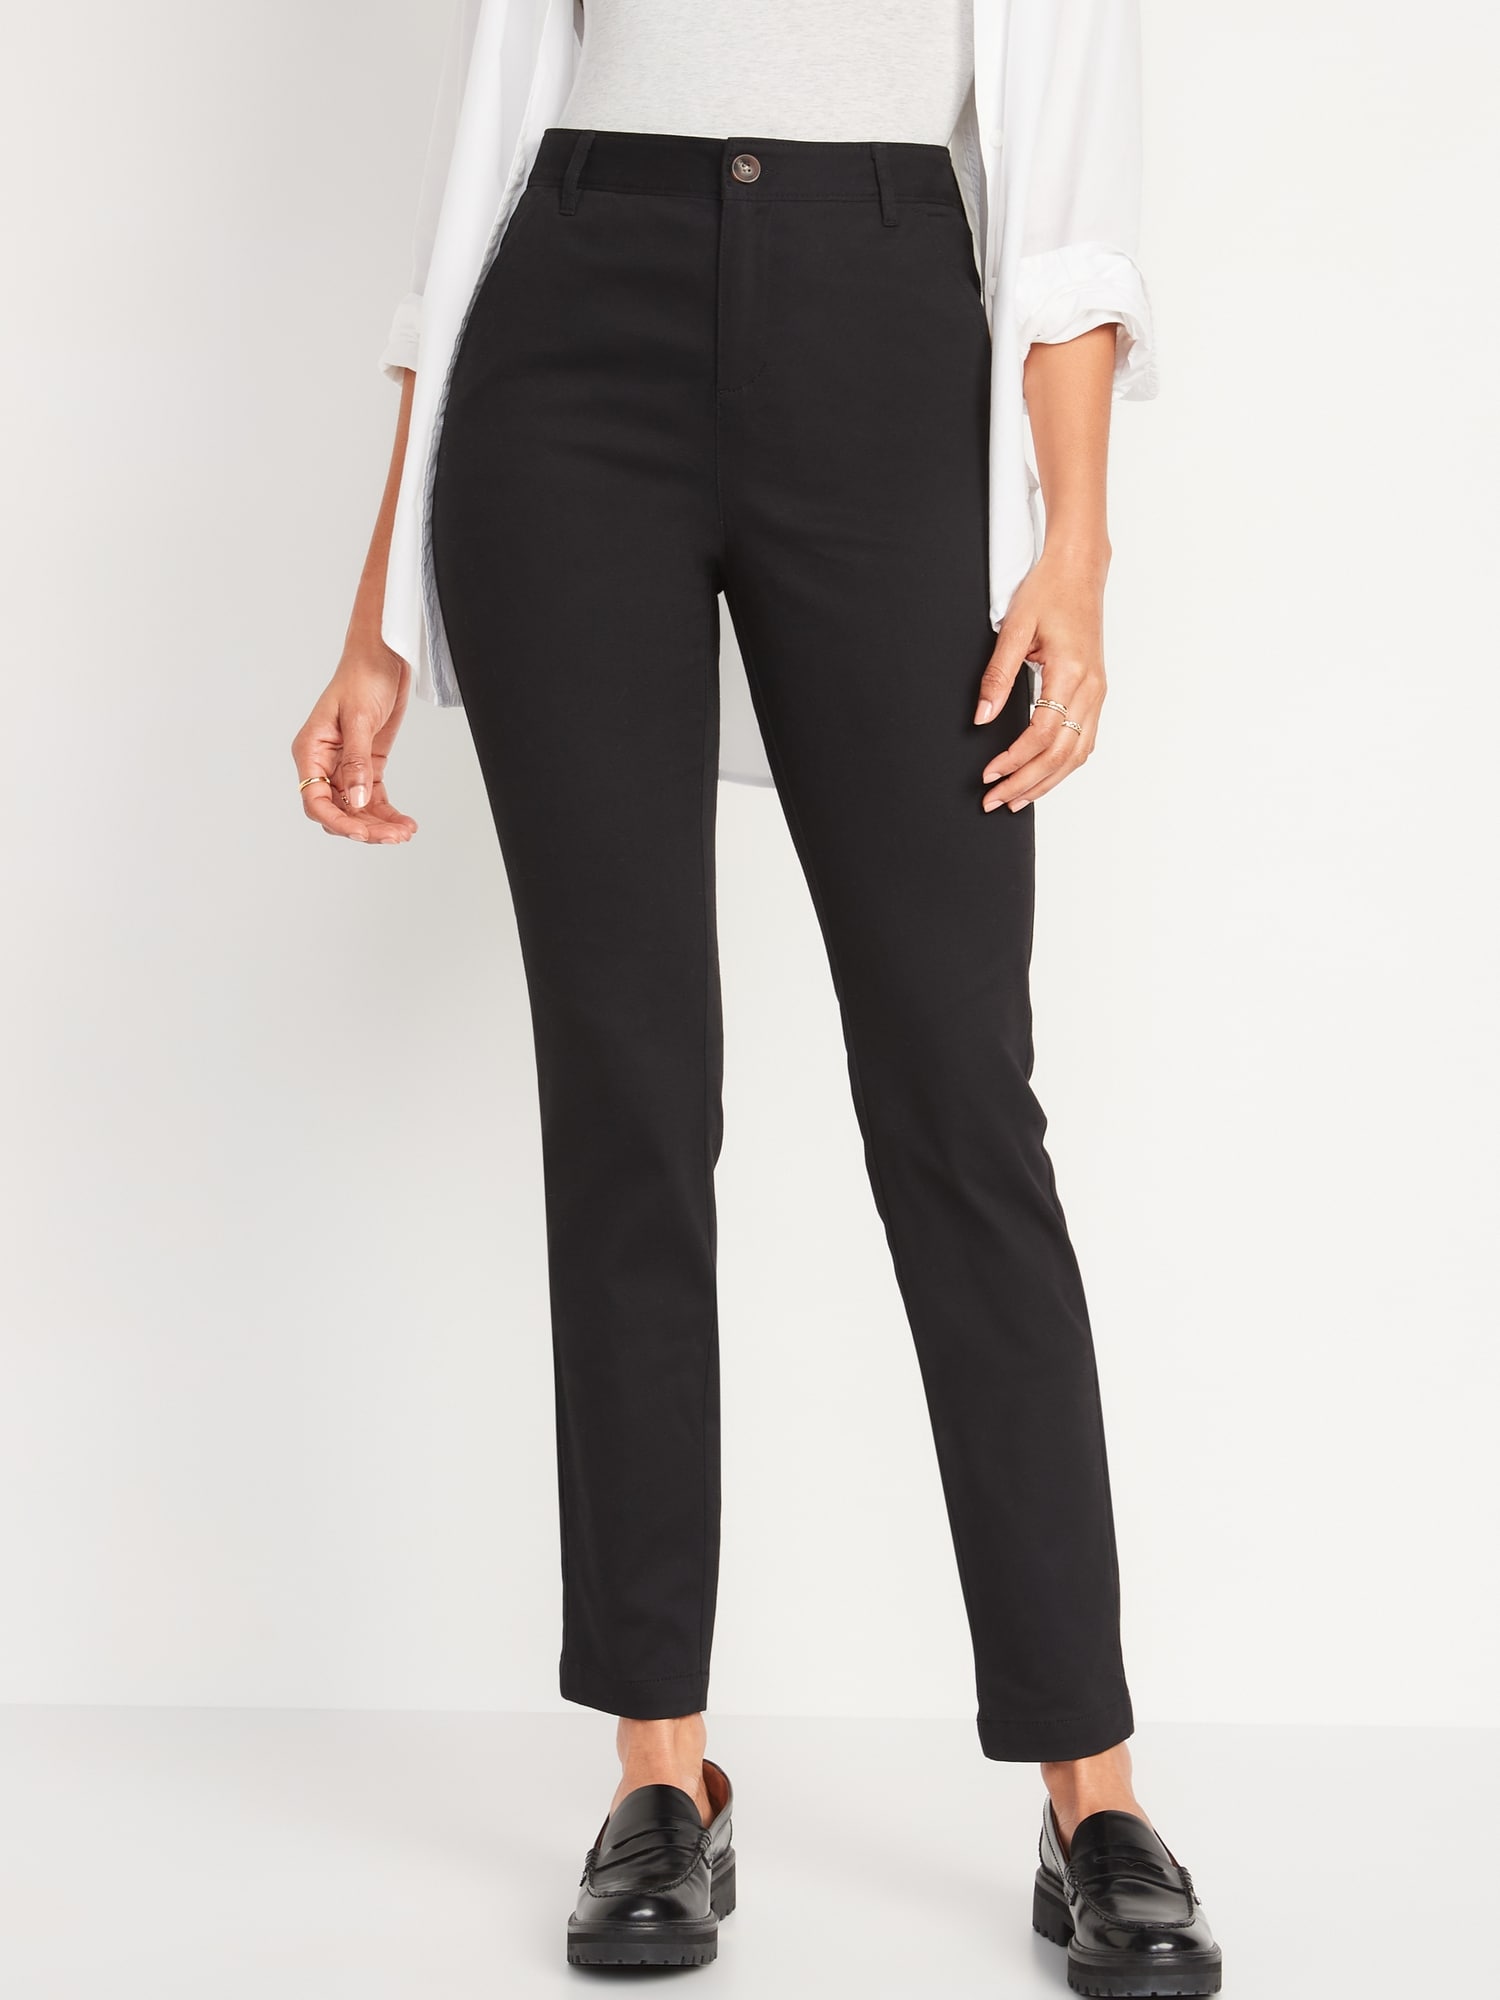 Tall Pants for Women